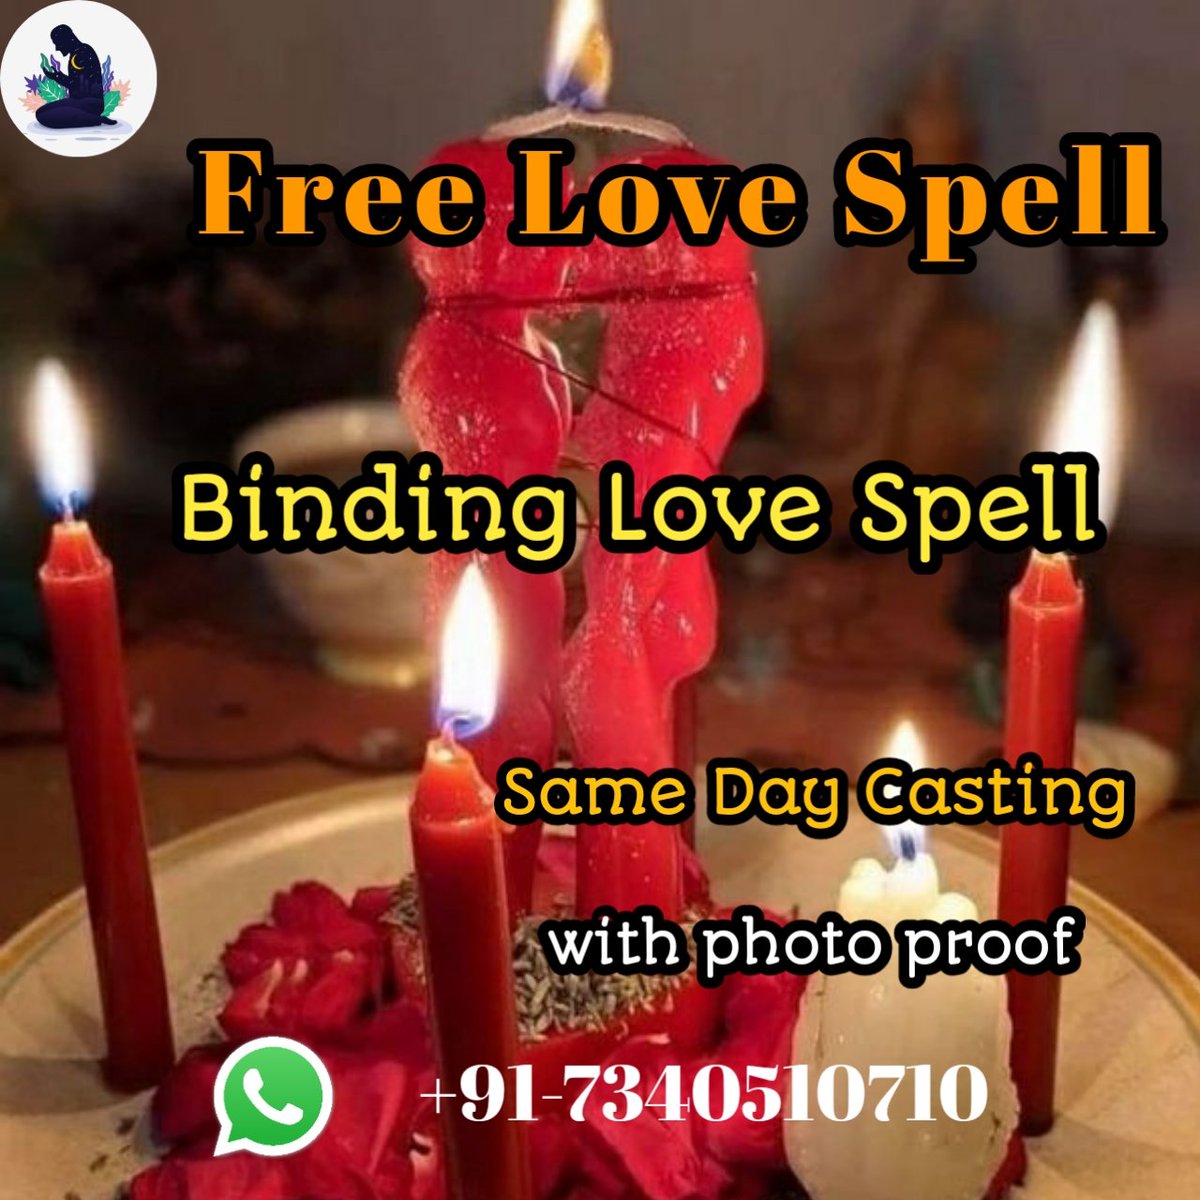 Love Spell That Work immediately
-Free Love Prediction😘😘 Free Psychics Readings🌷❤Online Spell Caster-Free magic spell fast & Easy👩‍❤️‍👨#leo #Temblor #Lostlove #lovespell #witchcraftspell #horoscopetoday #lowmood #compassion #Healing #stress #depression #soulmate #USA #uk #Canada